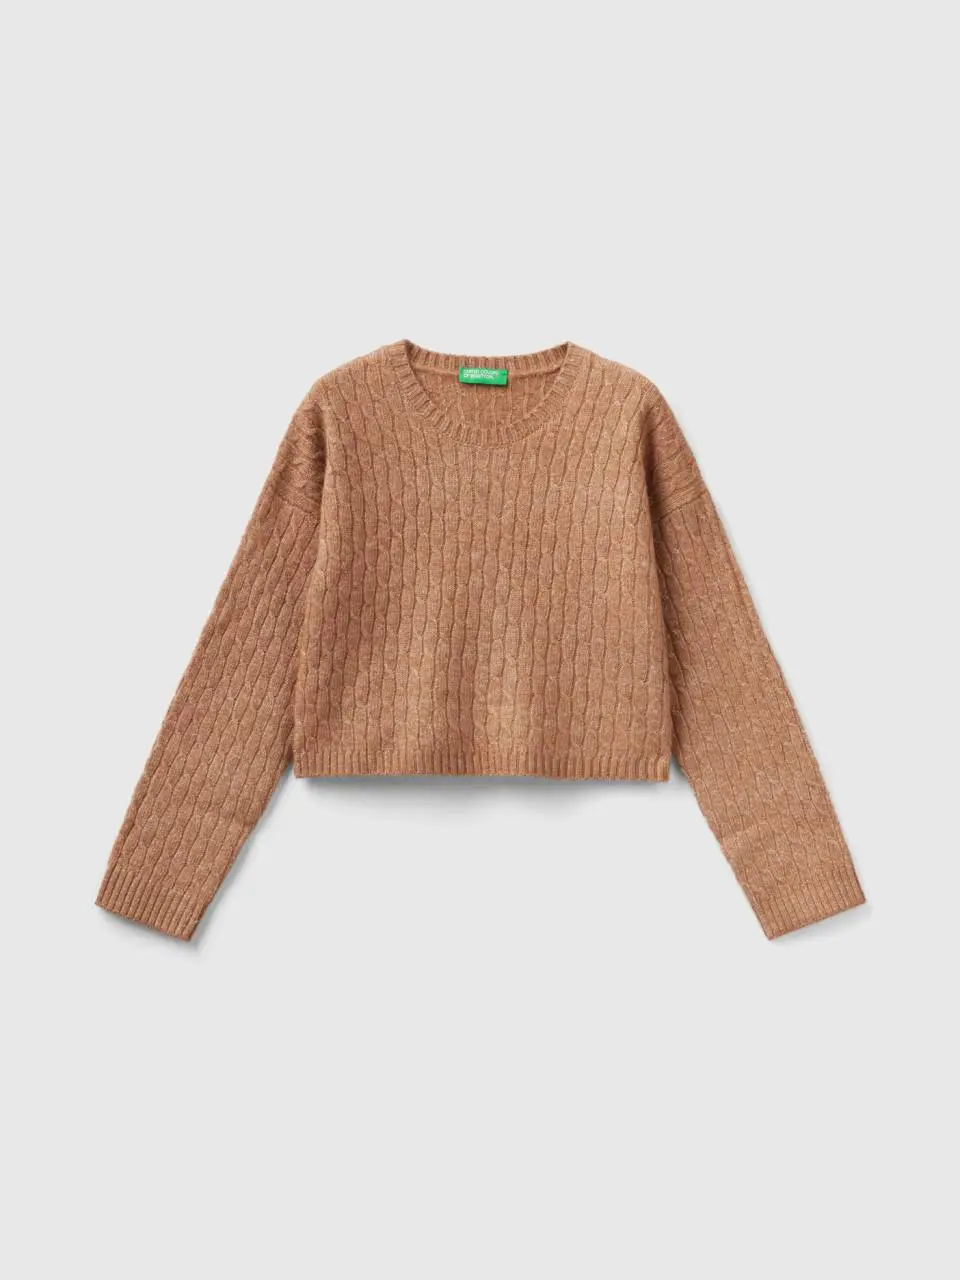 Benetton sweater with cables. 1